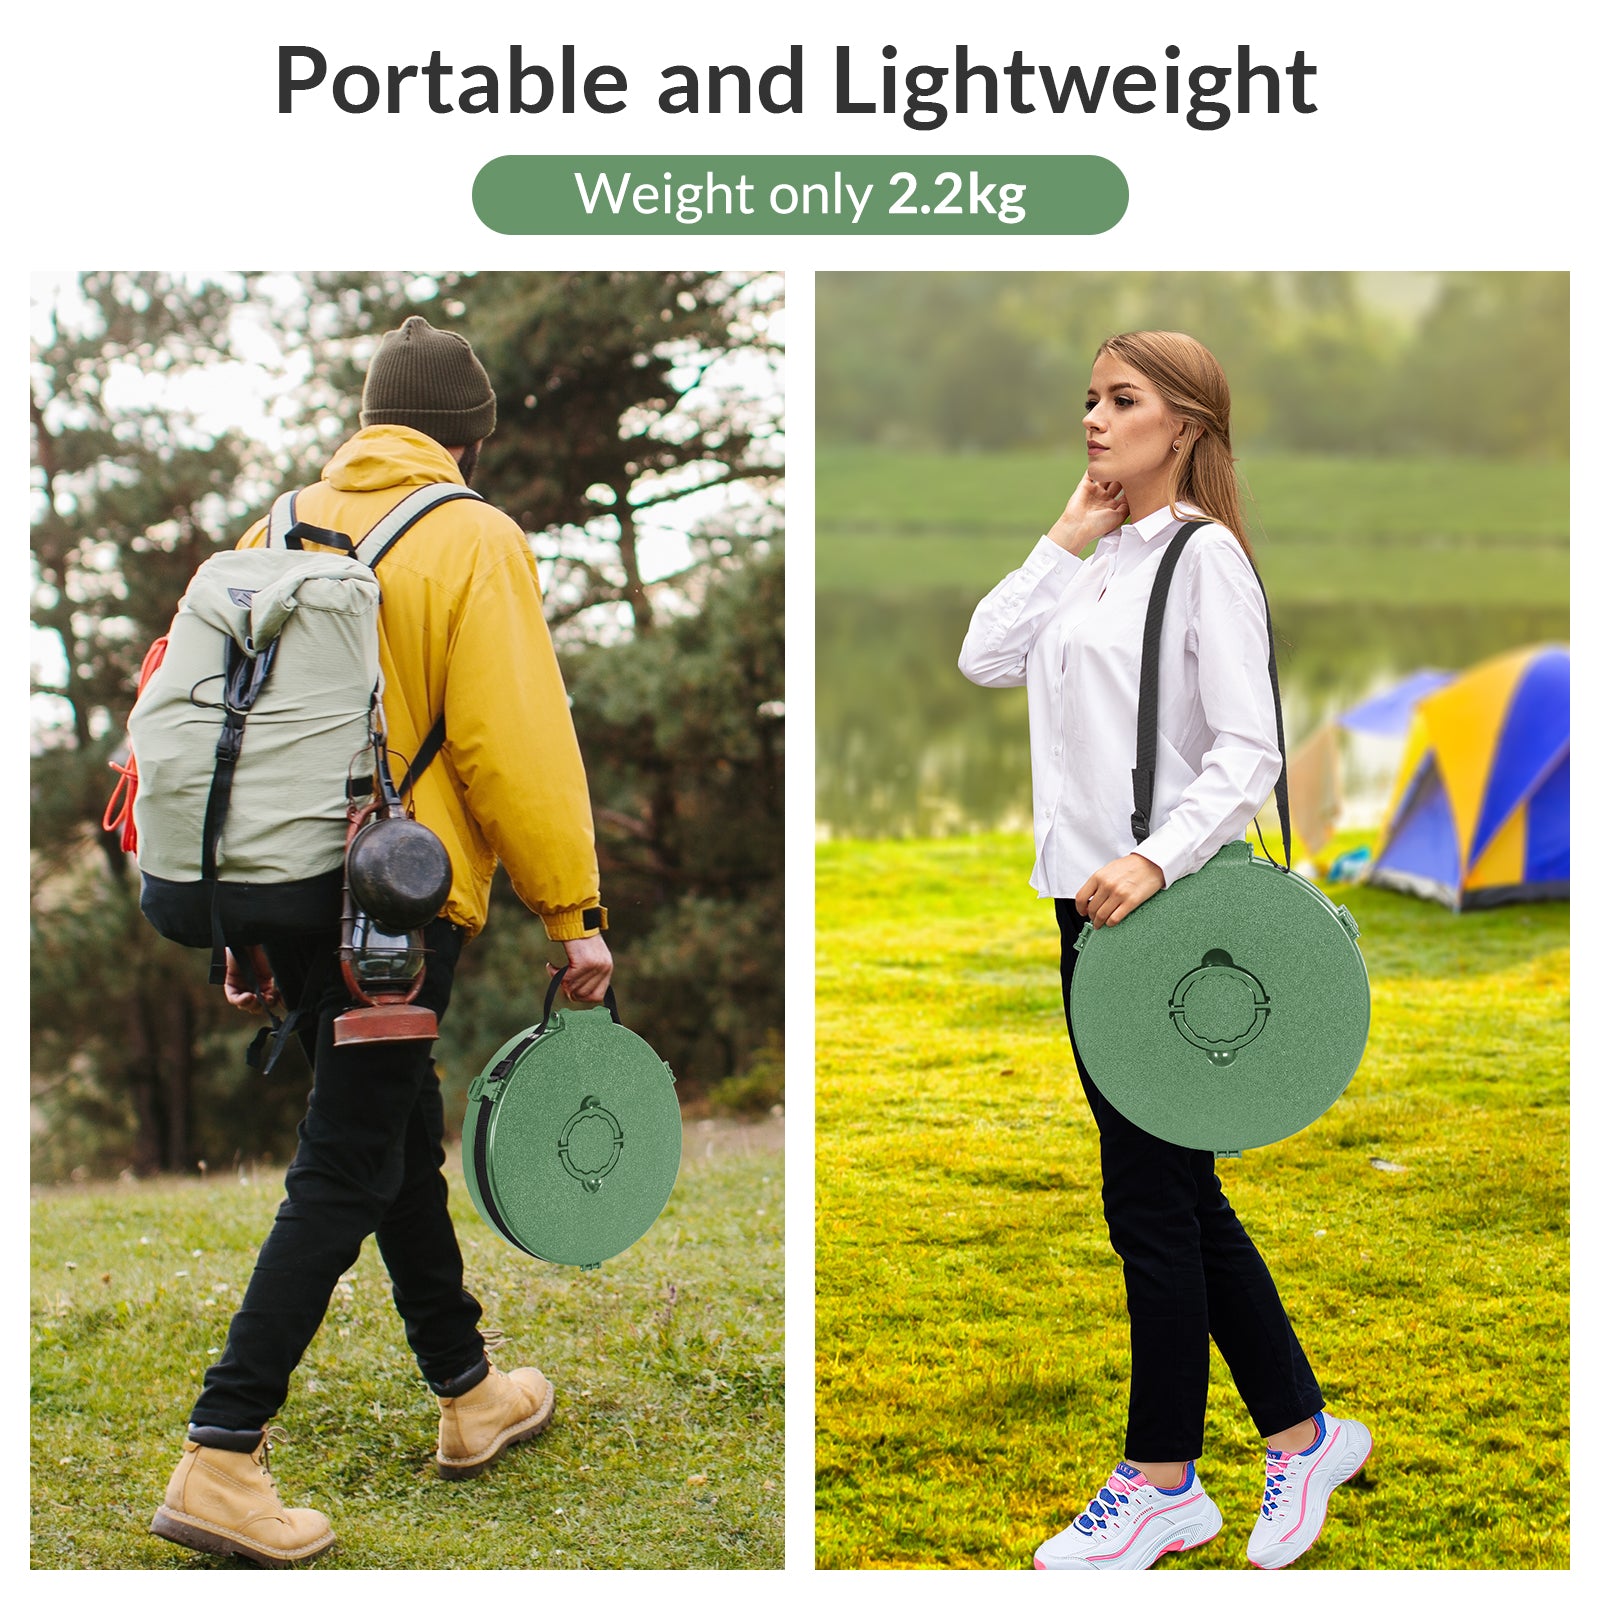 Leogreen-Portable-Camping-Toilet-Portable-Foldable-Lightweight-Hygiene-Hiking-Toilet-Toliet-for-Men-and-Women-for-Camping-Hiking-Excursions-Green